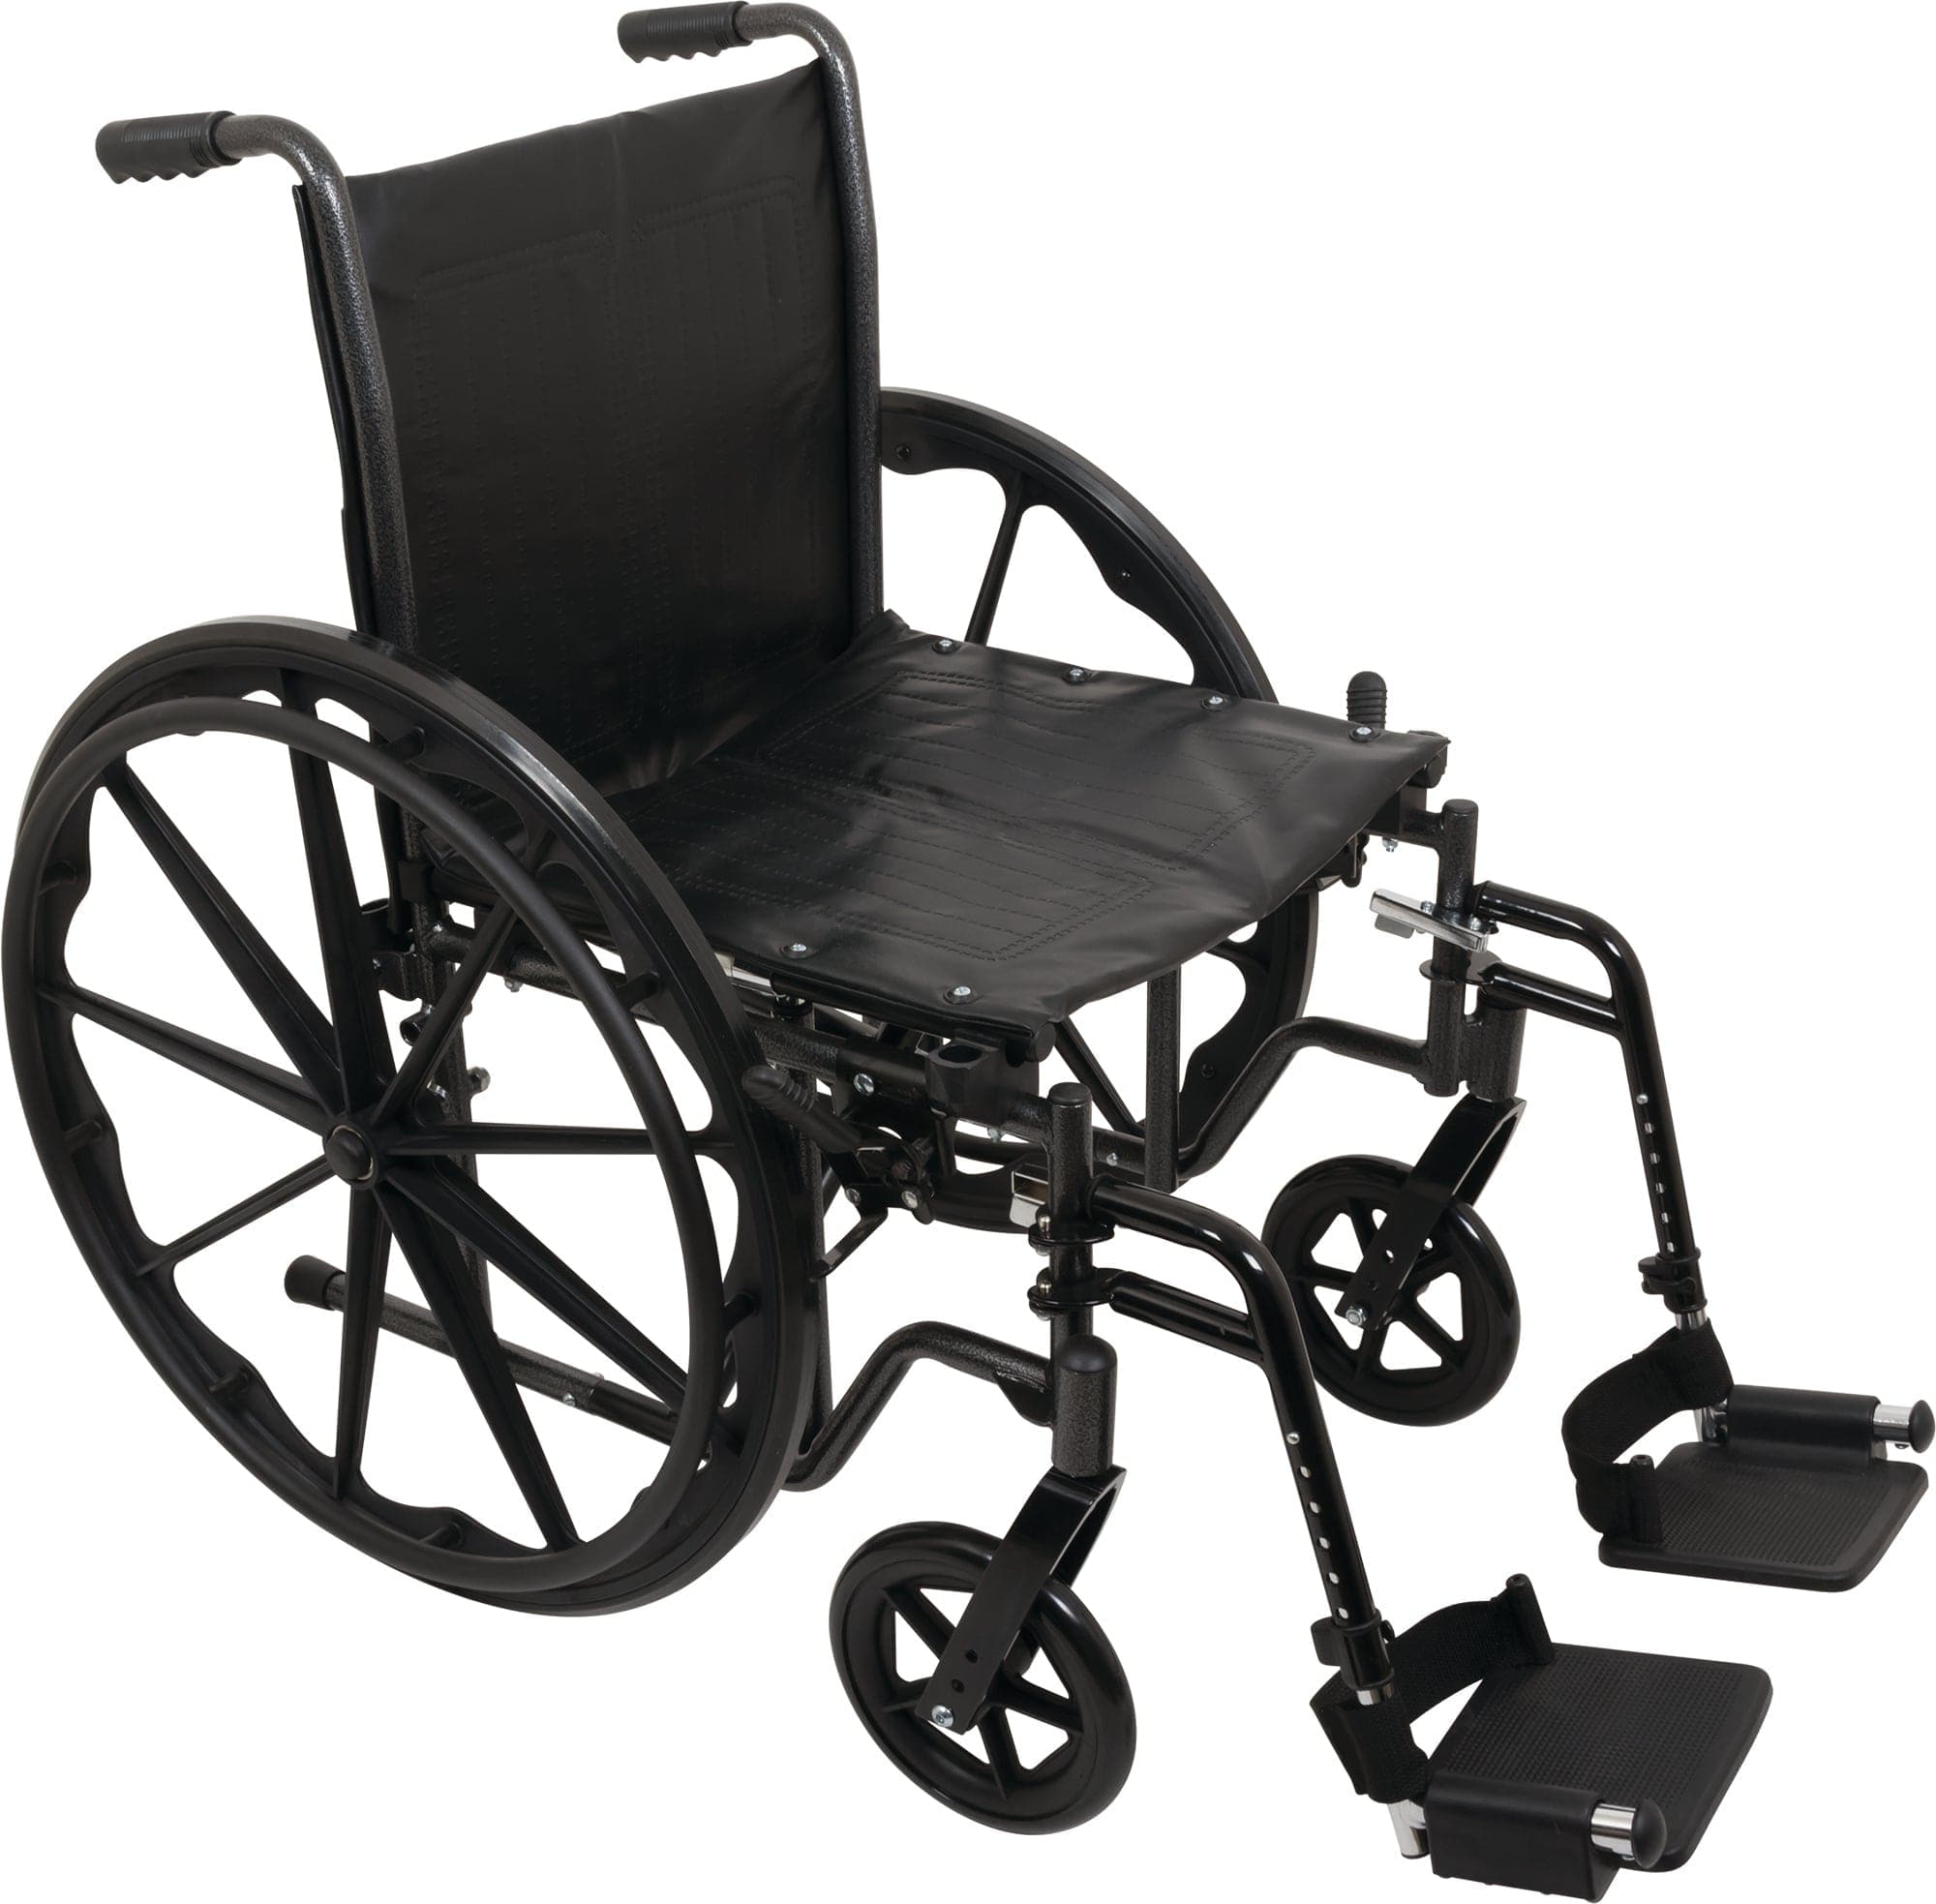 Compass Health K2 Wheelchairs Compass Health ProBasics K2 Wheelchair with 16" x 16" Seat and Elevating Legrests